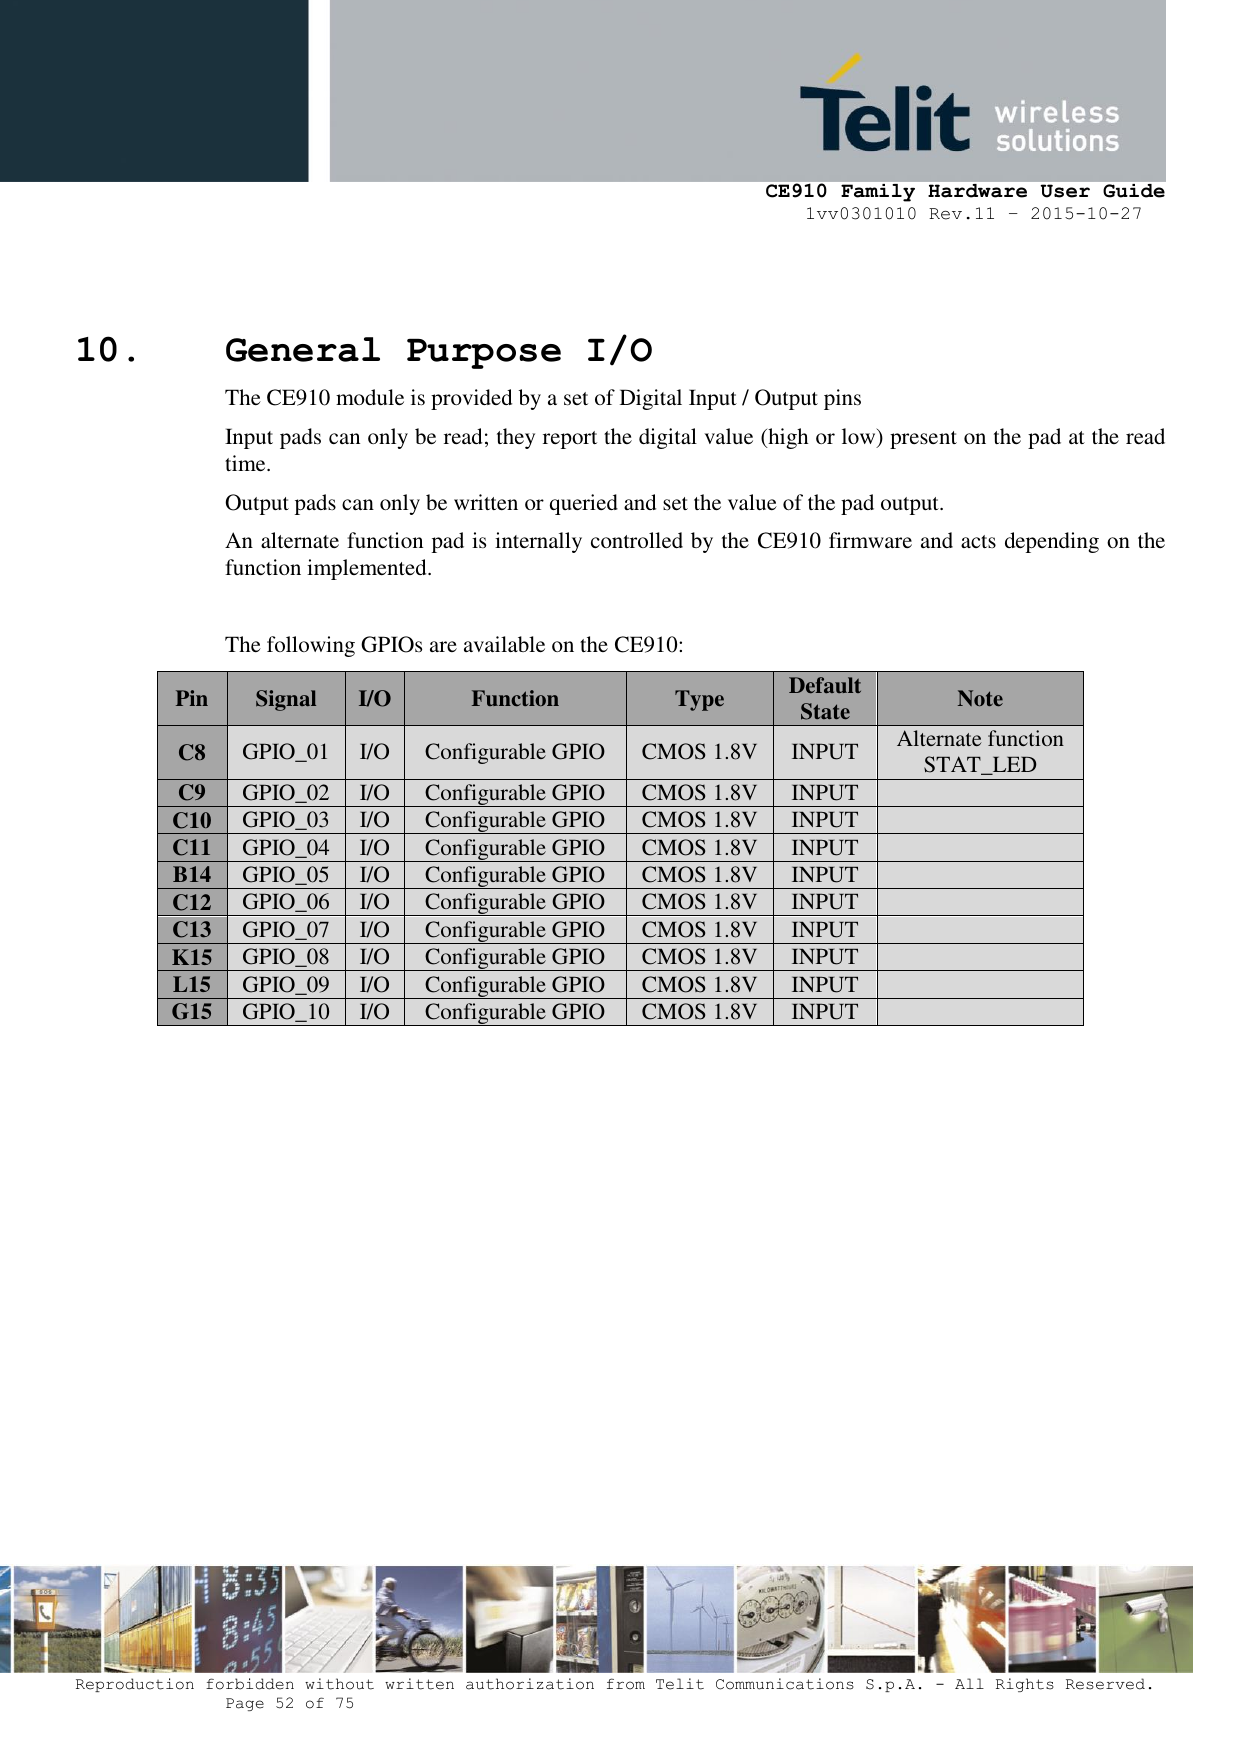     CE910 Family Hardware User Guide 1vv0301010 Rev.11 – 2015-10-27 Reproduction forbidden without written authorization from Telit Communications S.p.A. - All Rights Reserved.    Page 52 of 75                                                     10. General Purpose I/O The CE910 module is provided by a set of Digital Input / Output pins Input pads can only be read; they report the digital value (high or low) present on the pad at the read time. Output pads can only be written or queried and set the value of the pad output. An alternate function pad is internally controlled by the CE910 firmware and acts depending on the function implemented.  The following GPIOs are available on the CE910: Pin Signal I/O Function Type Default State Note C8 GPIO_01 I/O Configurable GPIO CMOS 1.8V INPUT Alternate function STAT_LED C9 GPIO_02 I/O Configurable GPIO CMOS 1.8V INPUT  C10 GPIO_03 I/O Configurable GPIO CMOS 1.8V INPUT  C11 GPIO_04 I/O Configurable GPIO CMOS 1.8V INPUT  B14 GPIO_05 I/O Configurable GPIO CMOS 1.8V INPUT  C12 GPIO_06 I/O Configurable GPIO CMOS 1.8V INPUT  C13 GPIO_07 I/O Configurable GPIO CMOS 1.8V INPUT  K15 GPIO_08 I/O Configurable GPIO CMOS 1.8V INPUT  L15 GPIO_09 I/O Configurable GPIO CMOS 1.8V INPUT  G15 GPIO_10 I/O Configurable GPIO CMOS 1.8V INPUT                 